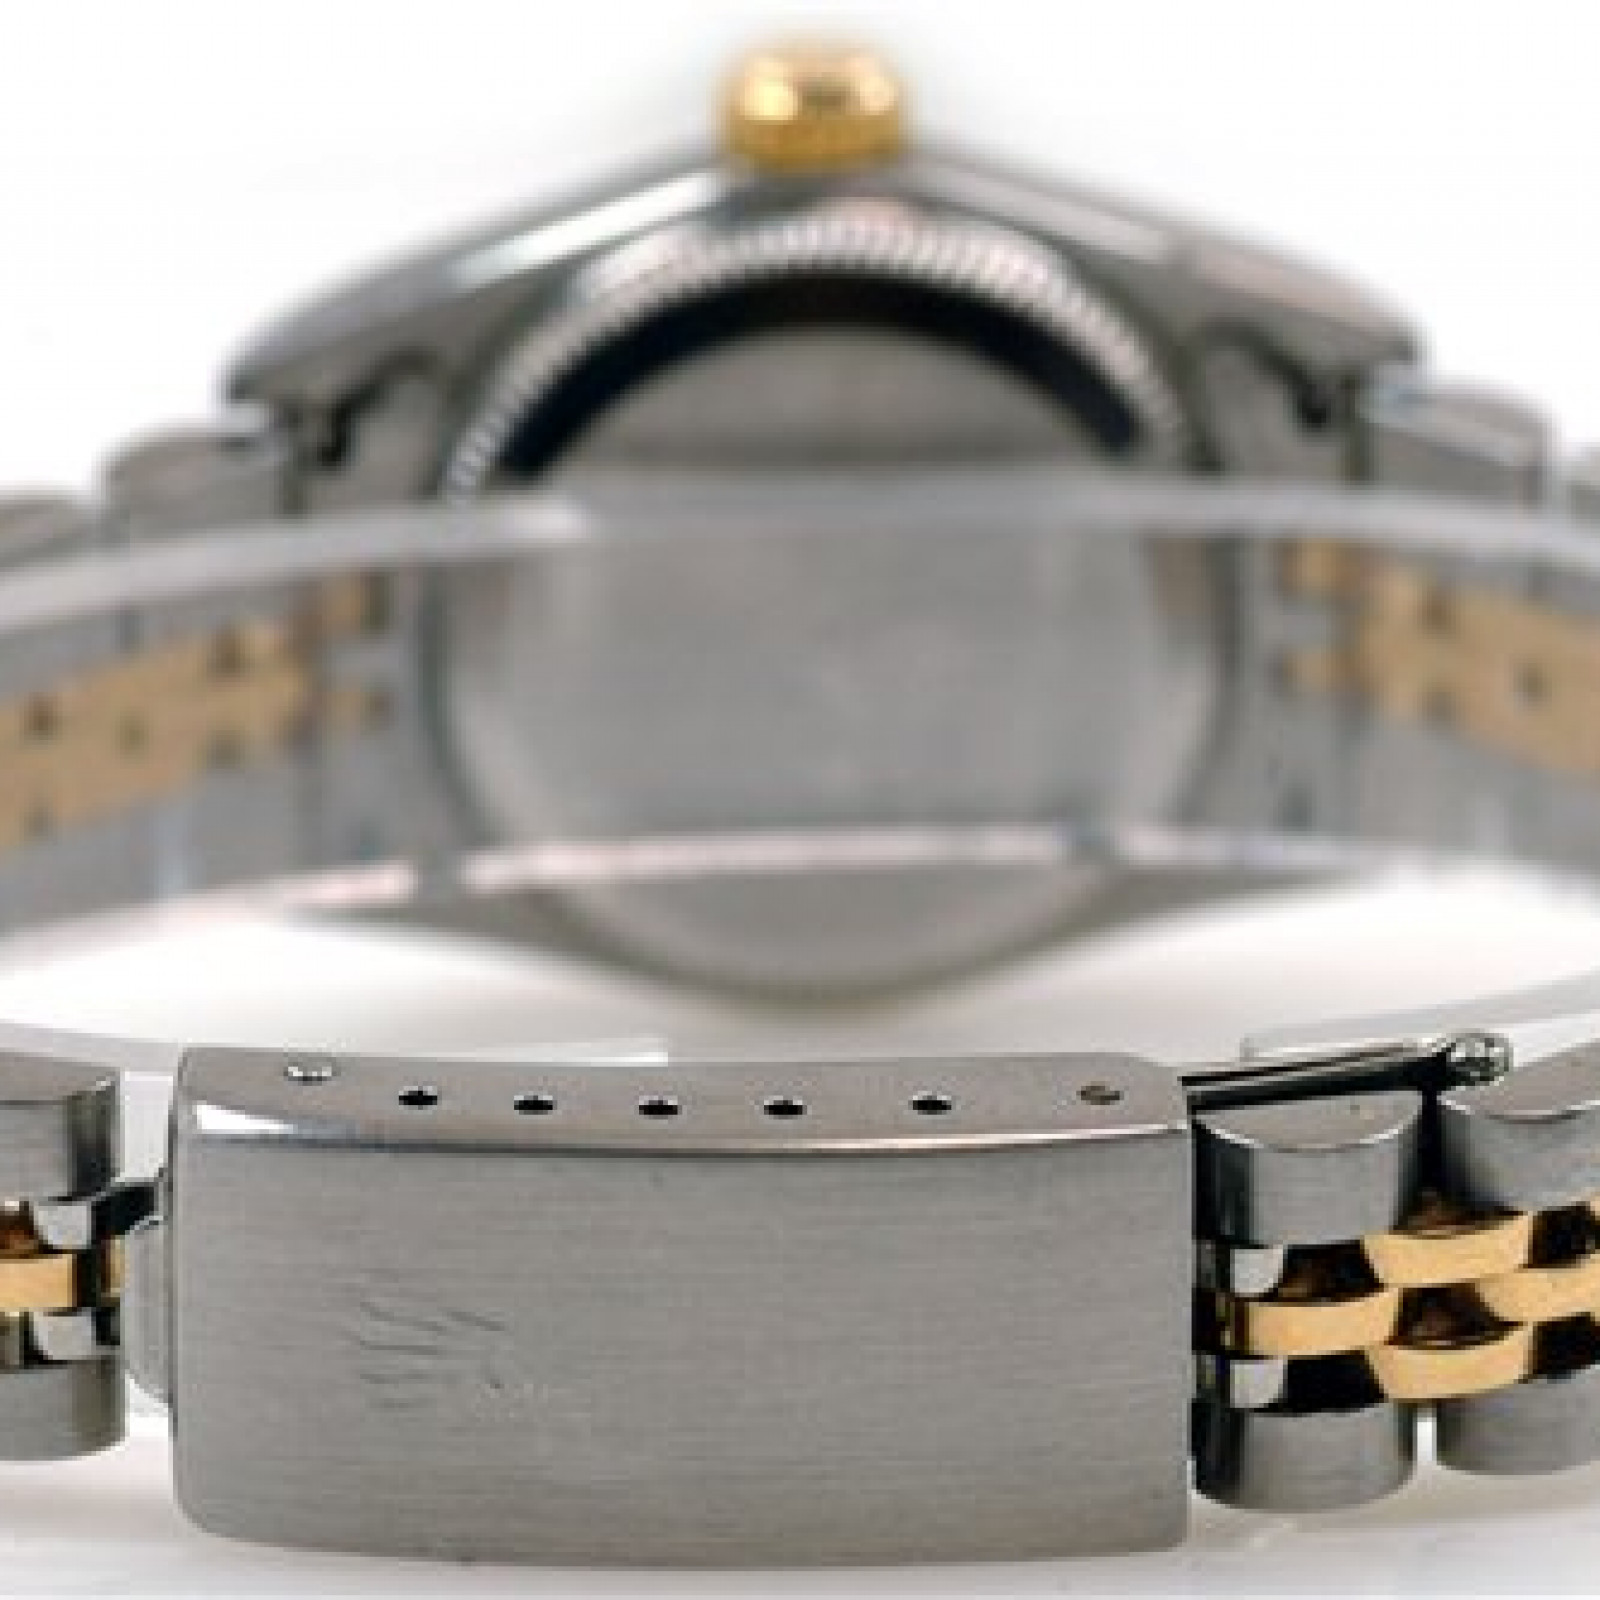 Rolex Oyster Perpetual 67243 Gold & Steel